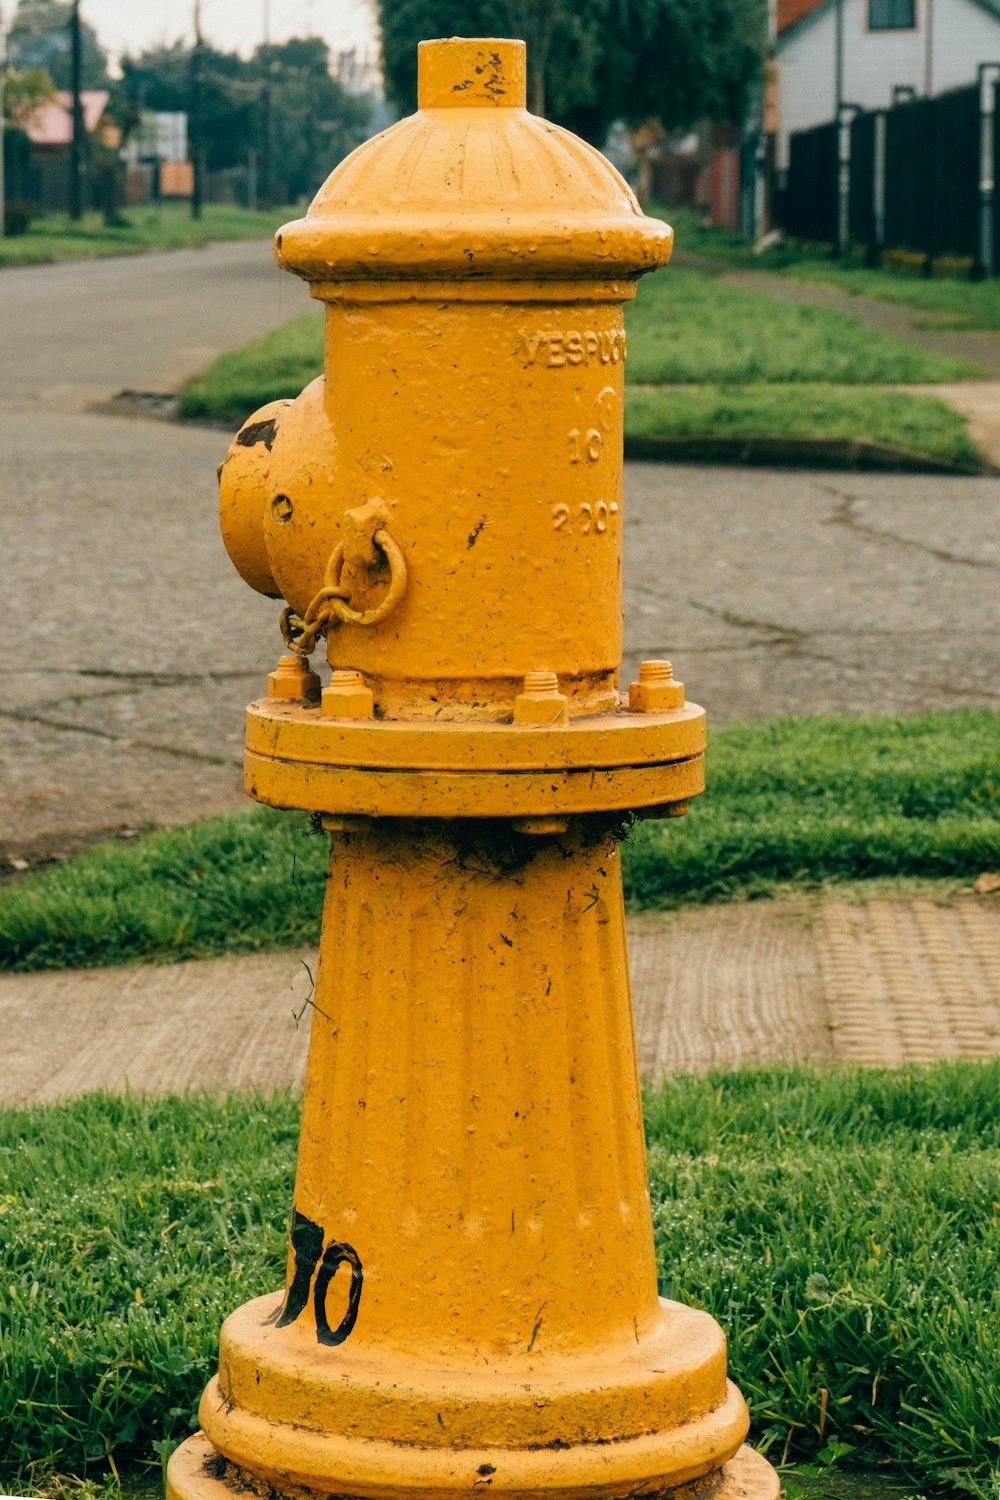 a yellow fire hydrant sitting on the side of a road